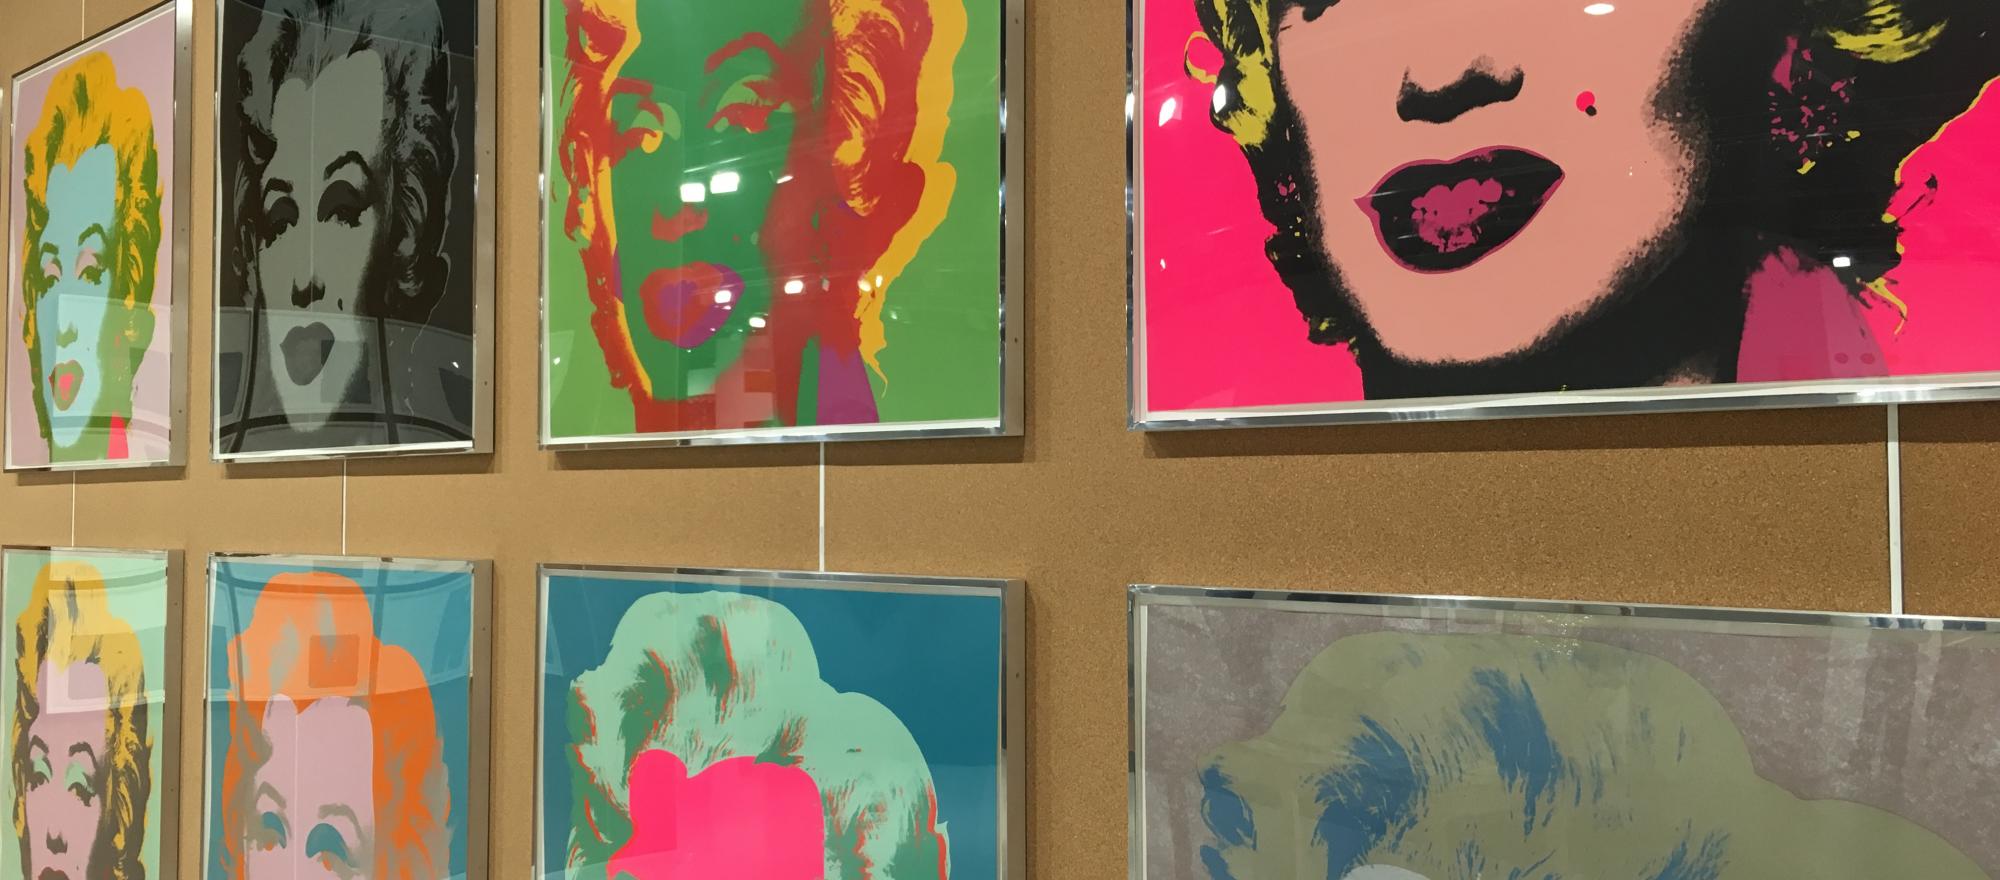 The work of Andy Warhol is a fixture at Art Basel. Photo: Drew Limsky